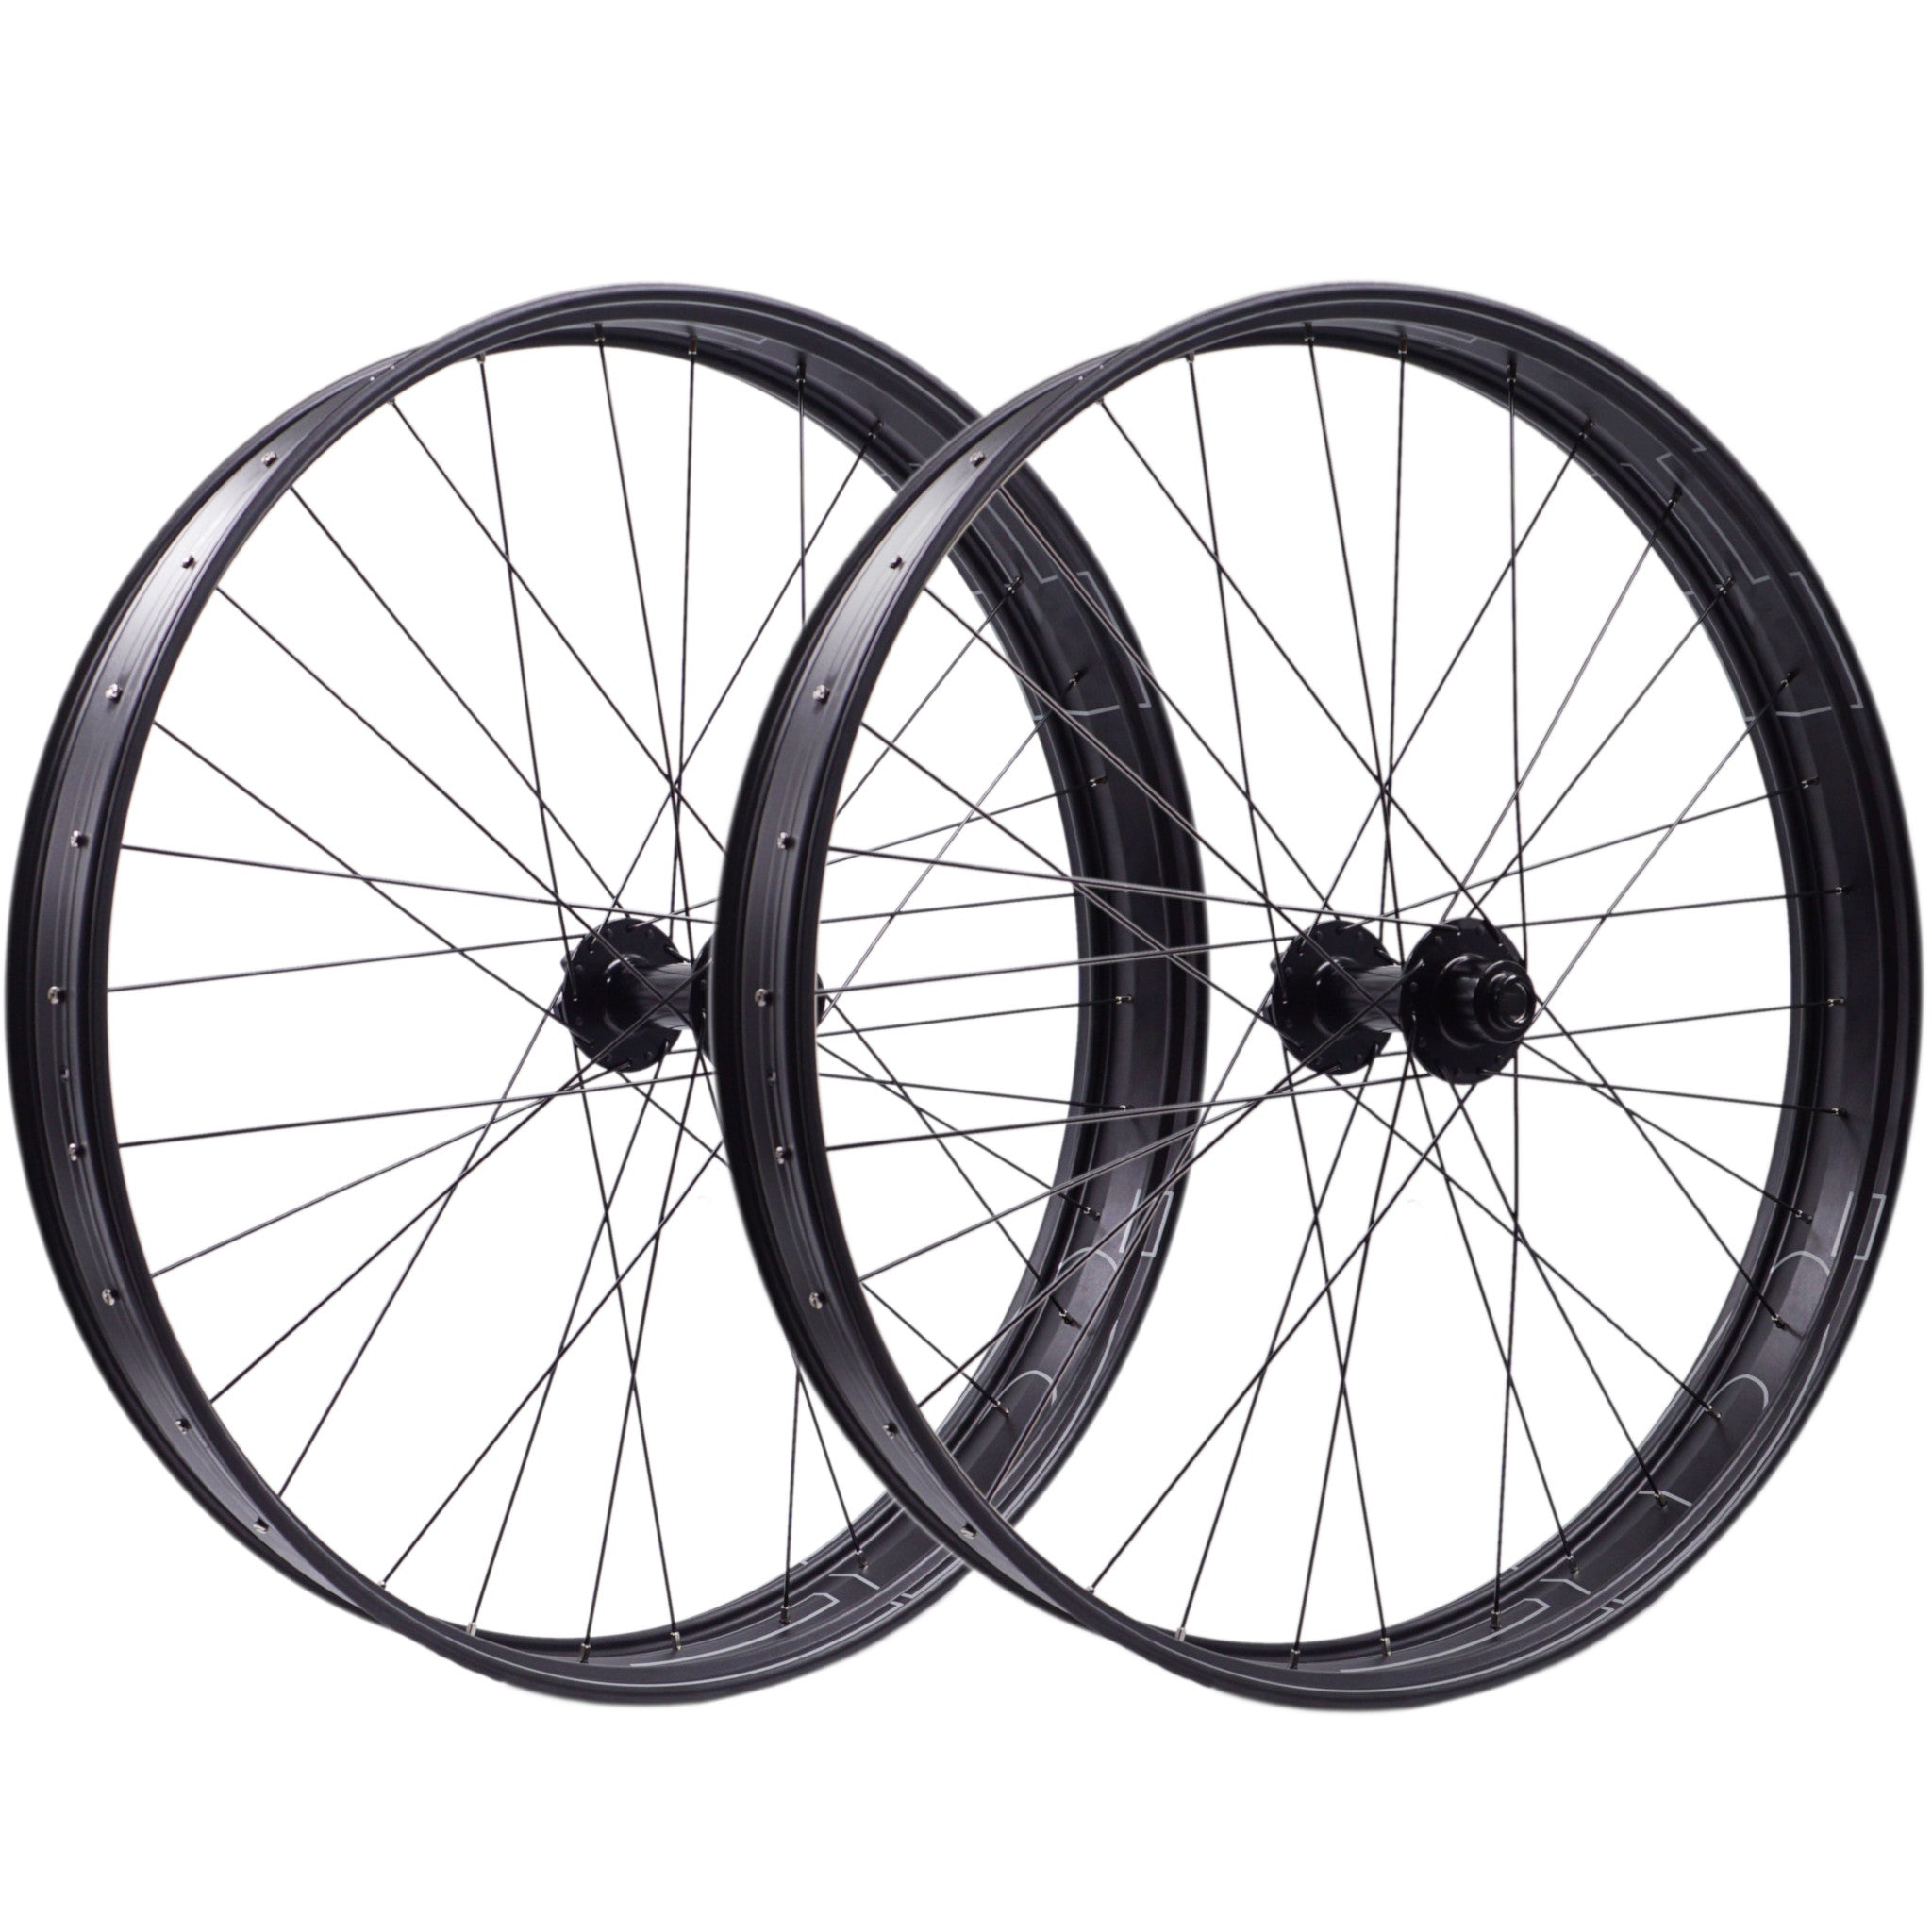 HED 26" Fat Bike Wheelset. Photo shows the front and the rear wheel.